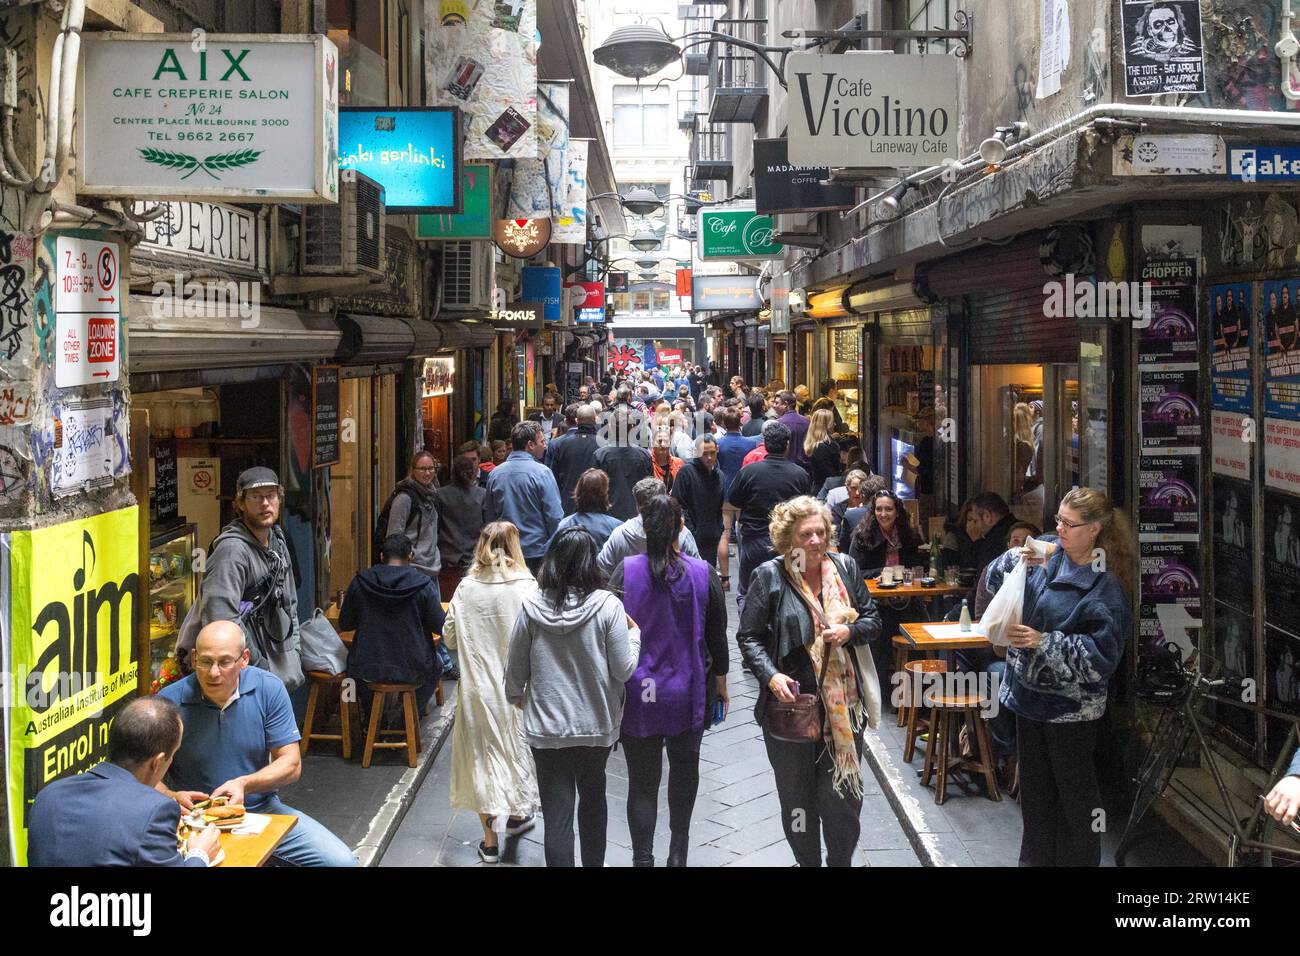 Melbourne, Australia, April 21, 2015: The busy Centre Place alley filled with people Stock Photo